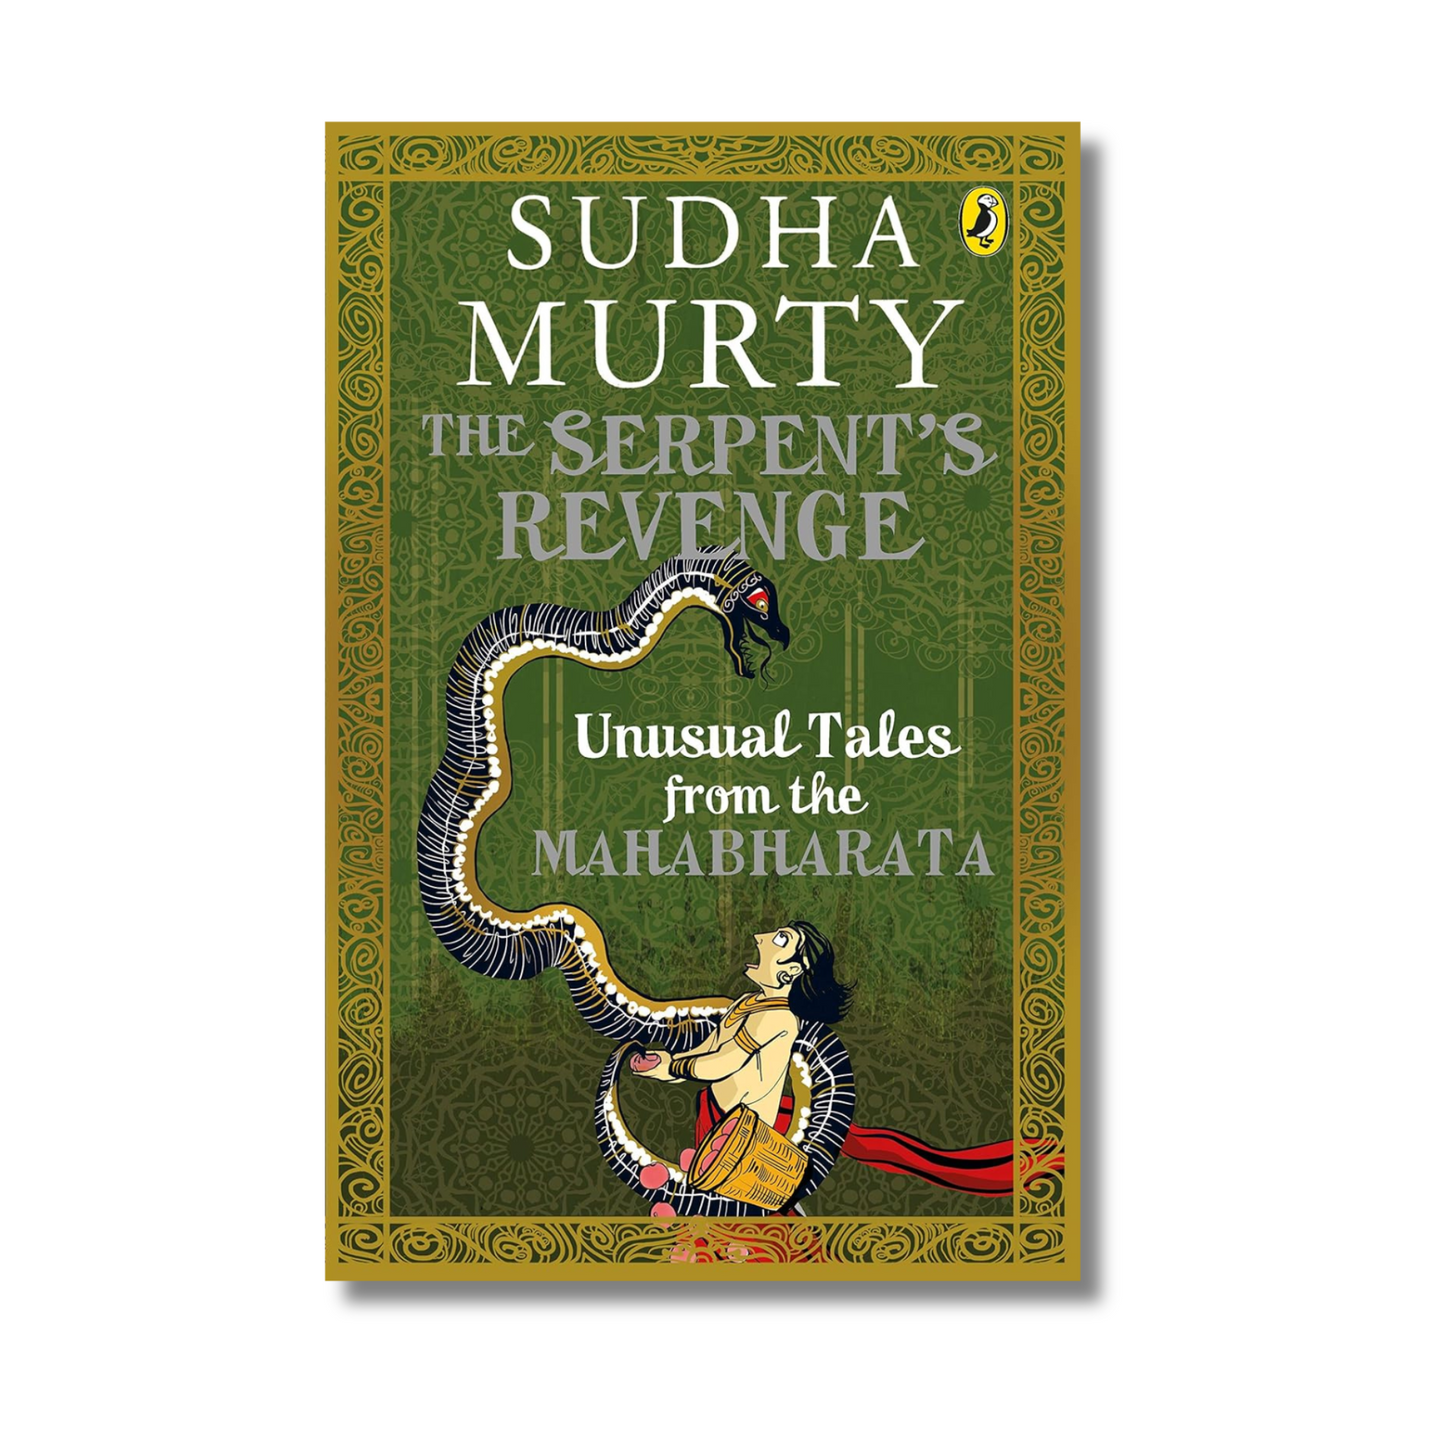 The Serpent's Revenge: Unusual Tales from the Mahabharata by Sudha Murty (Paperback)